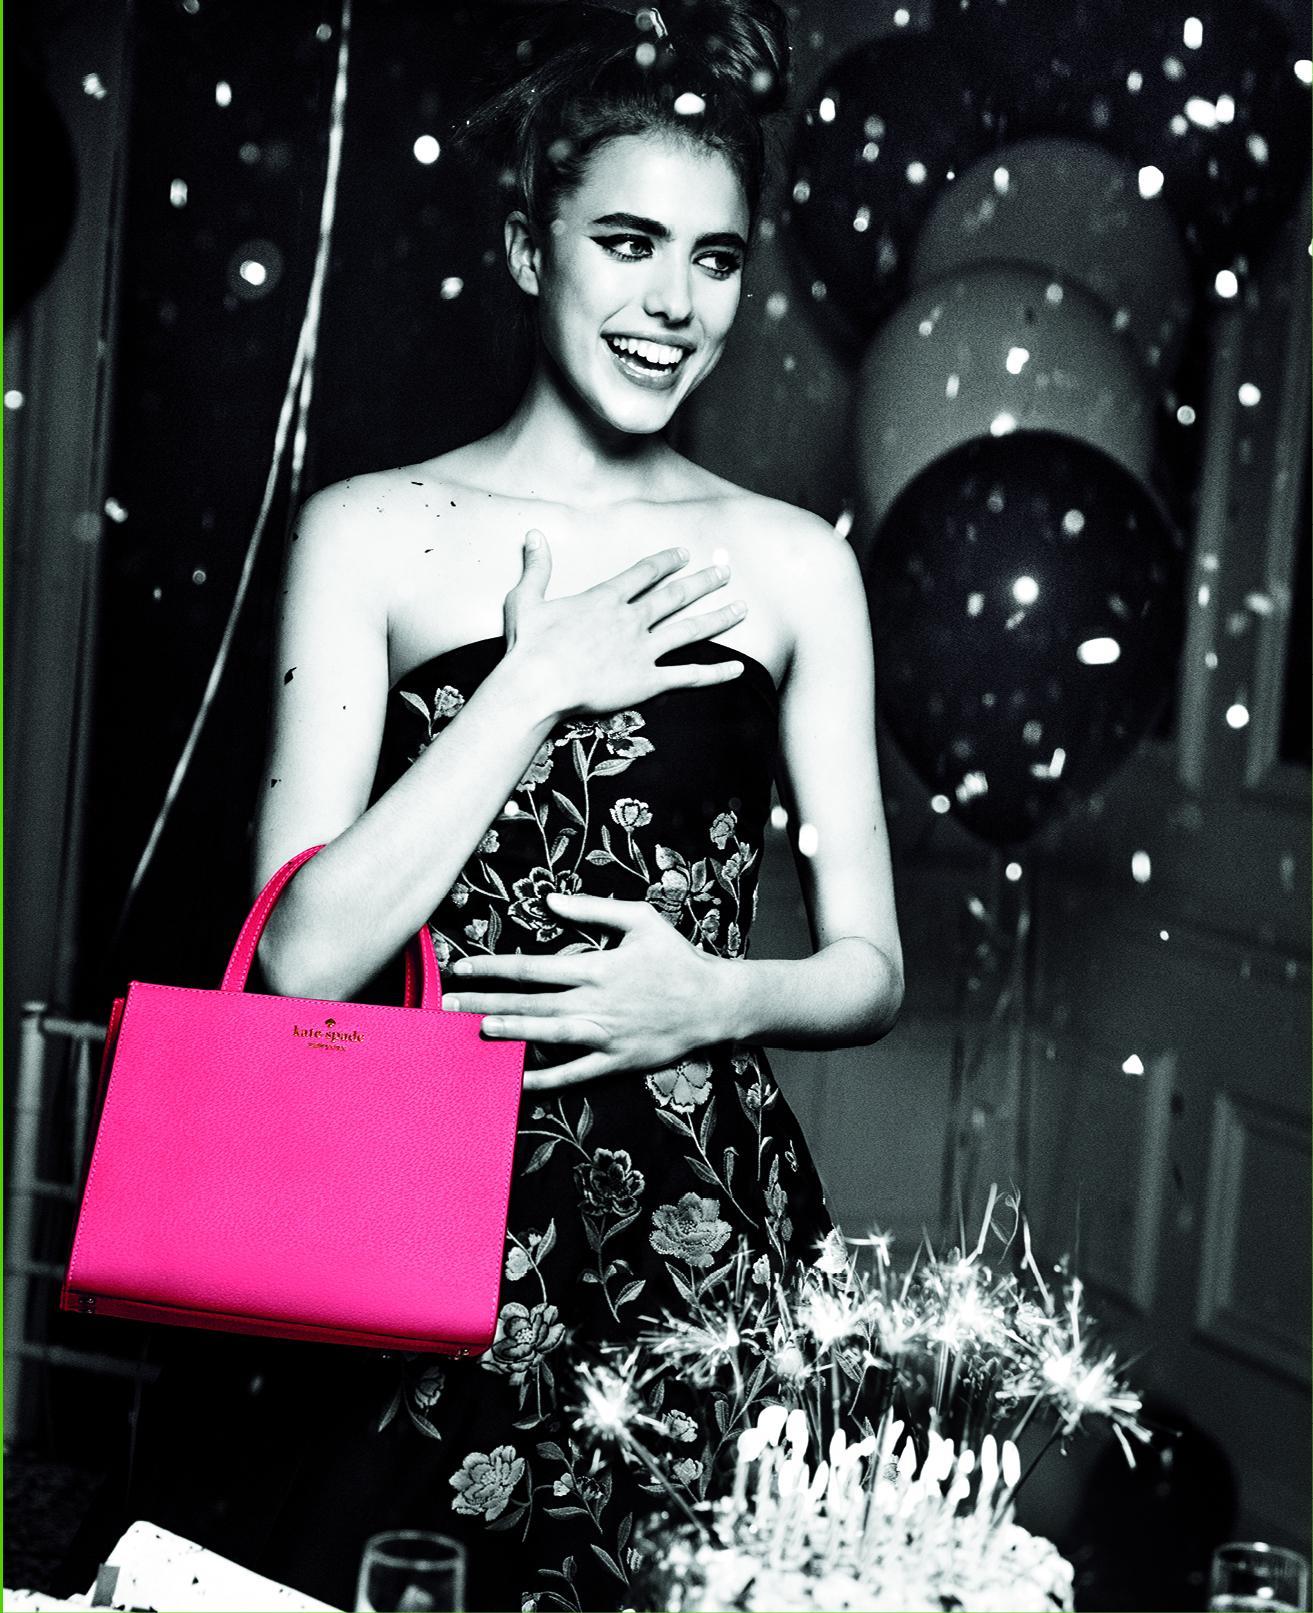 Actress Andie MacDowell's Daughter Margaret Qualley is the New Face of Kate  Spade